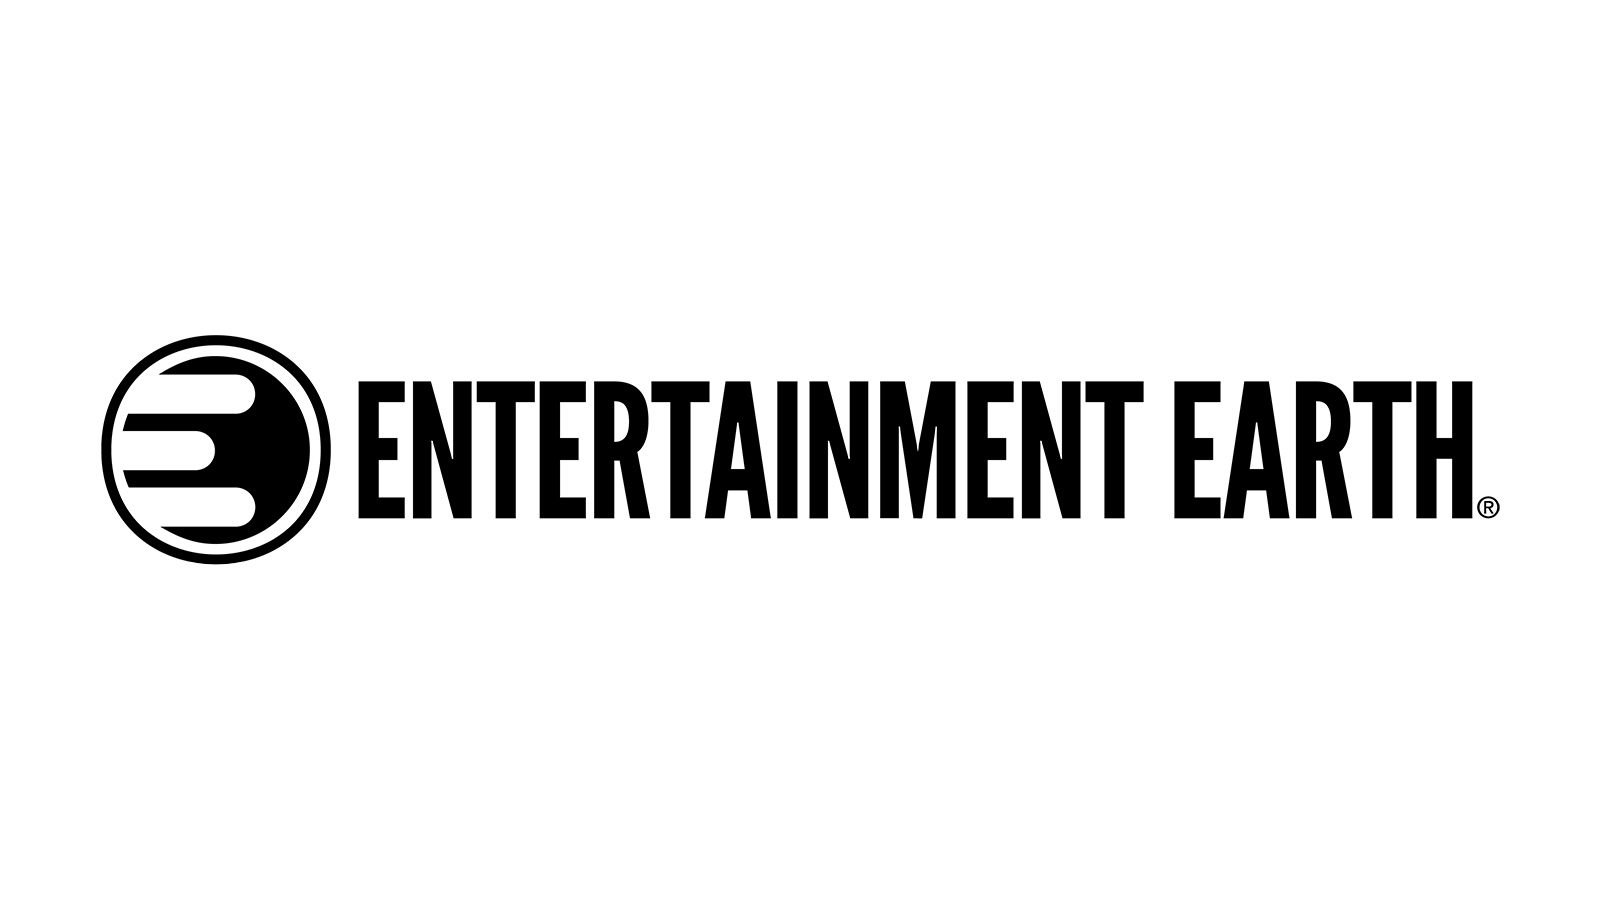 Exclusive Entertainment Earth Offer For Our Readers - 10% Off In Stock Items And Free Shipping On Orders $39+